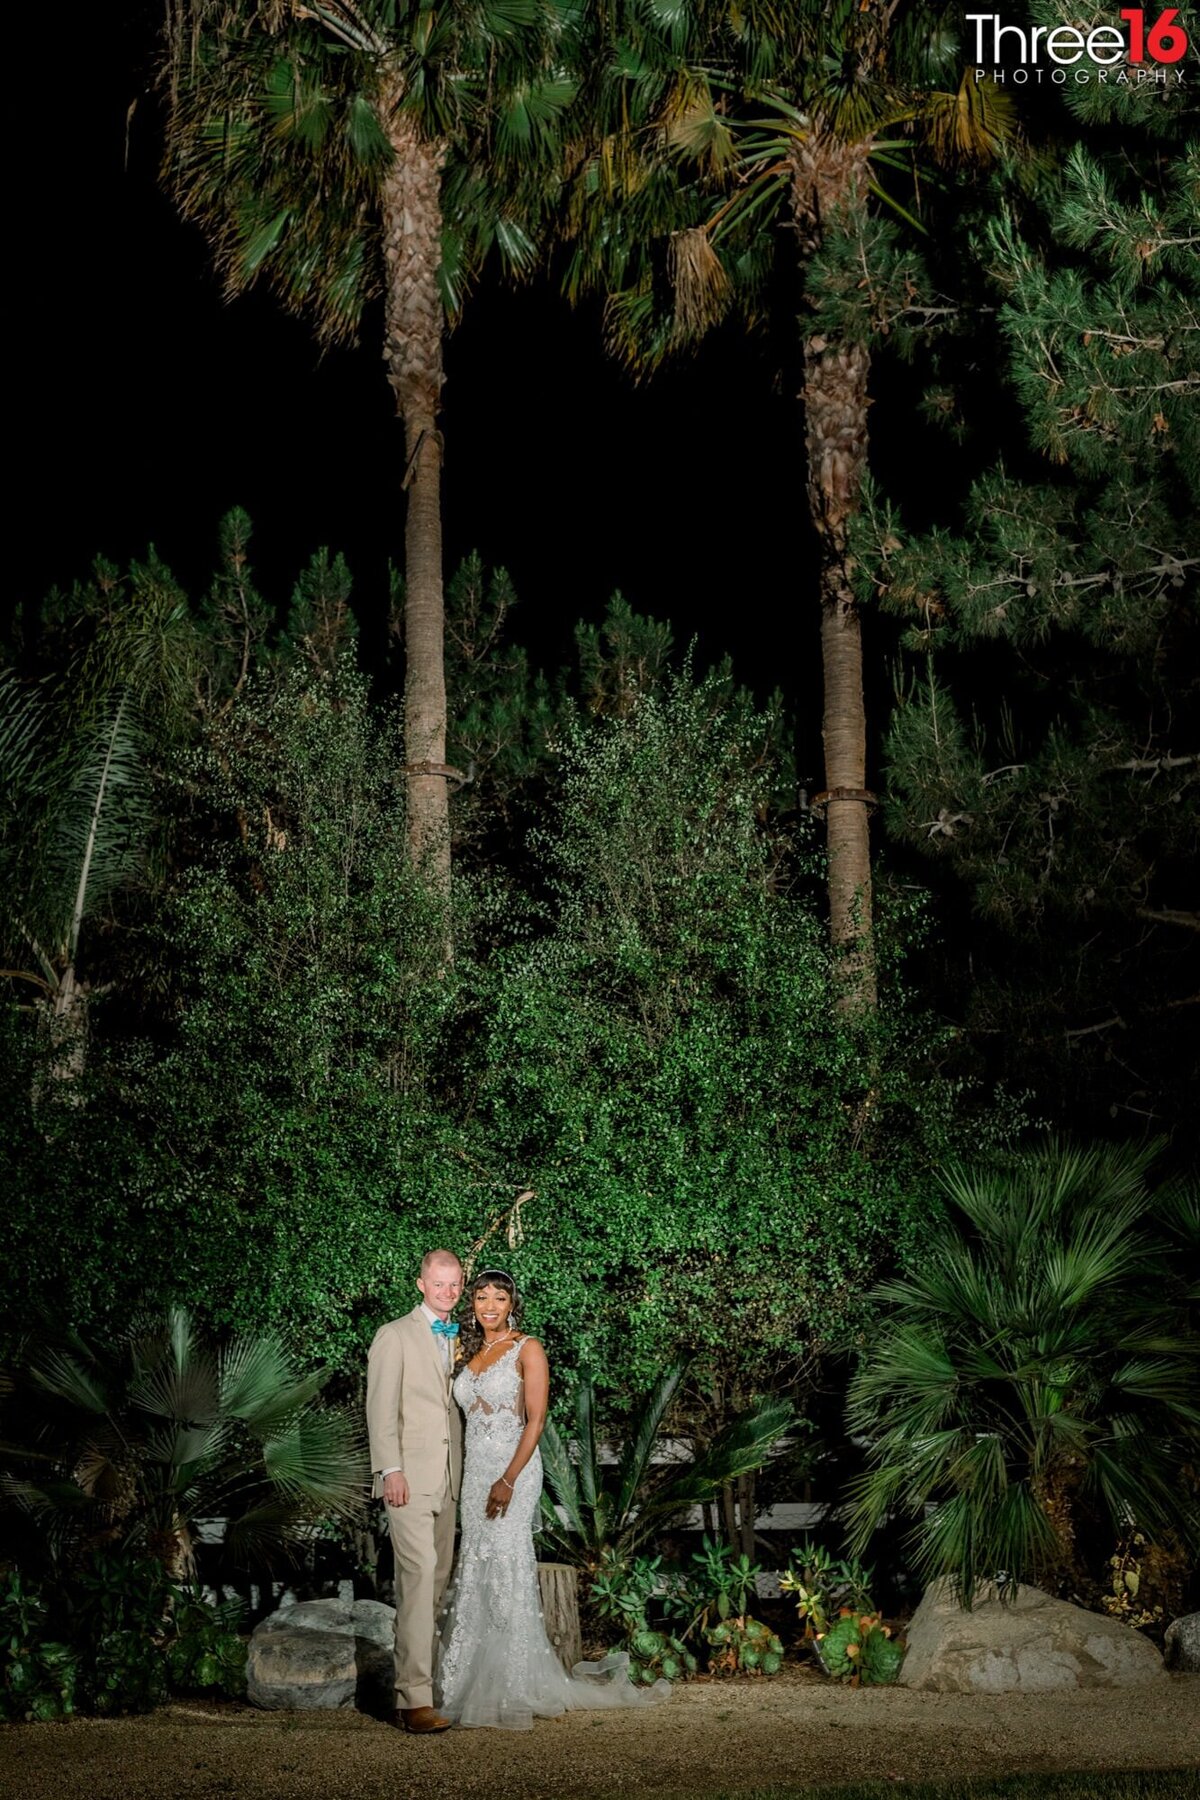 Bride and Groom pose together in front of large green foliage